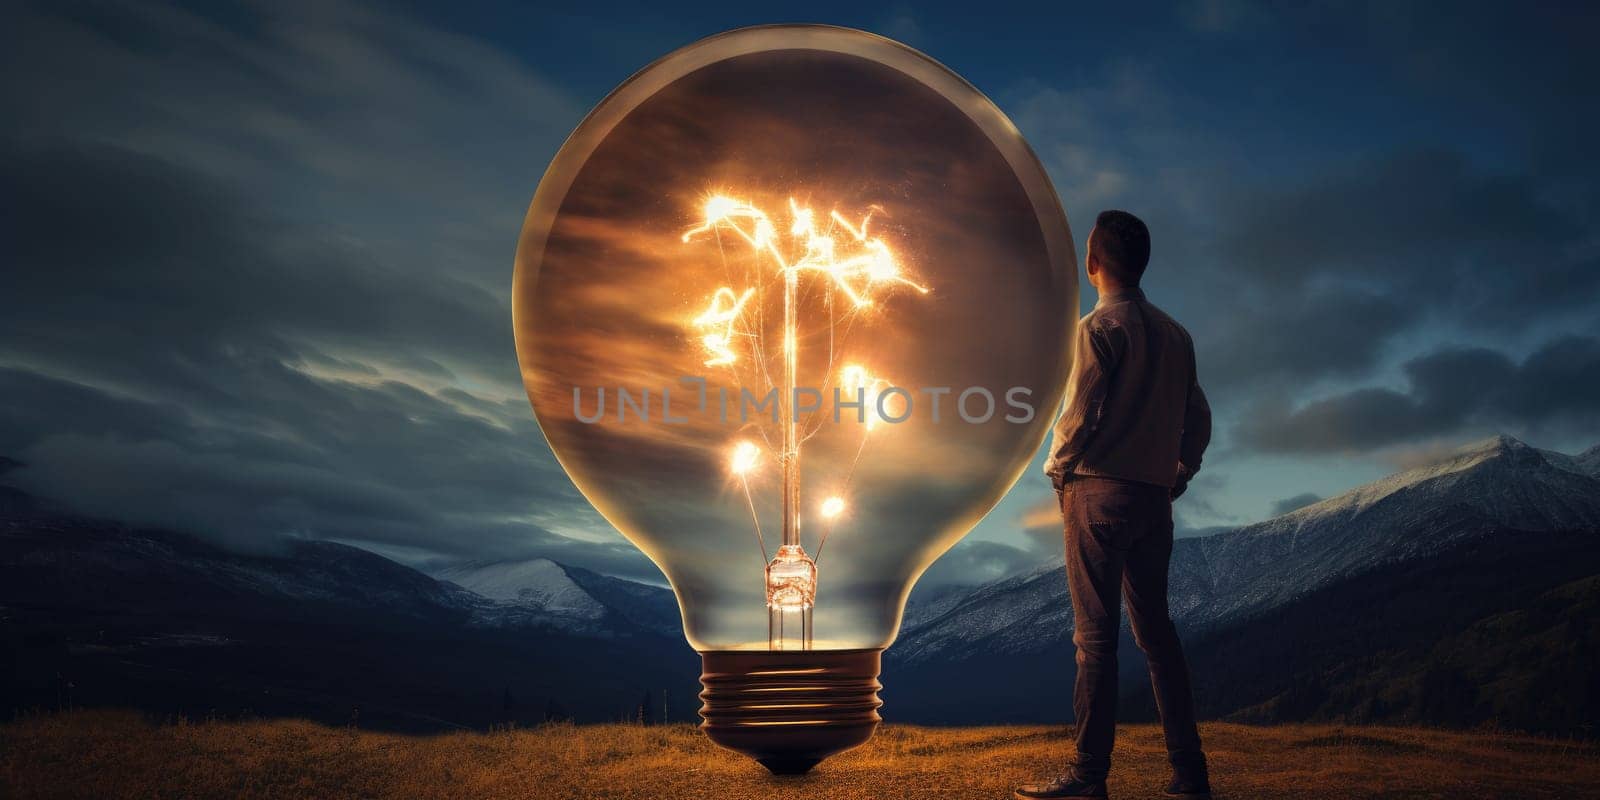 A huge bulb in front of the man with some ideas by Kadula